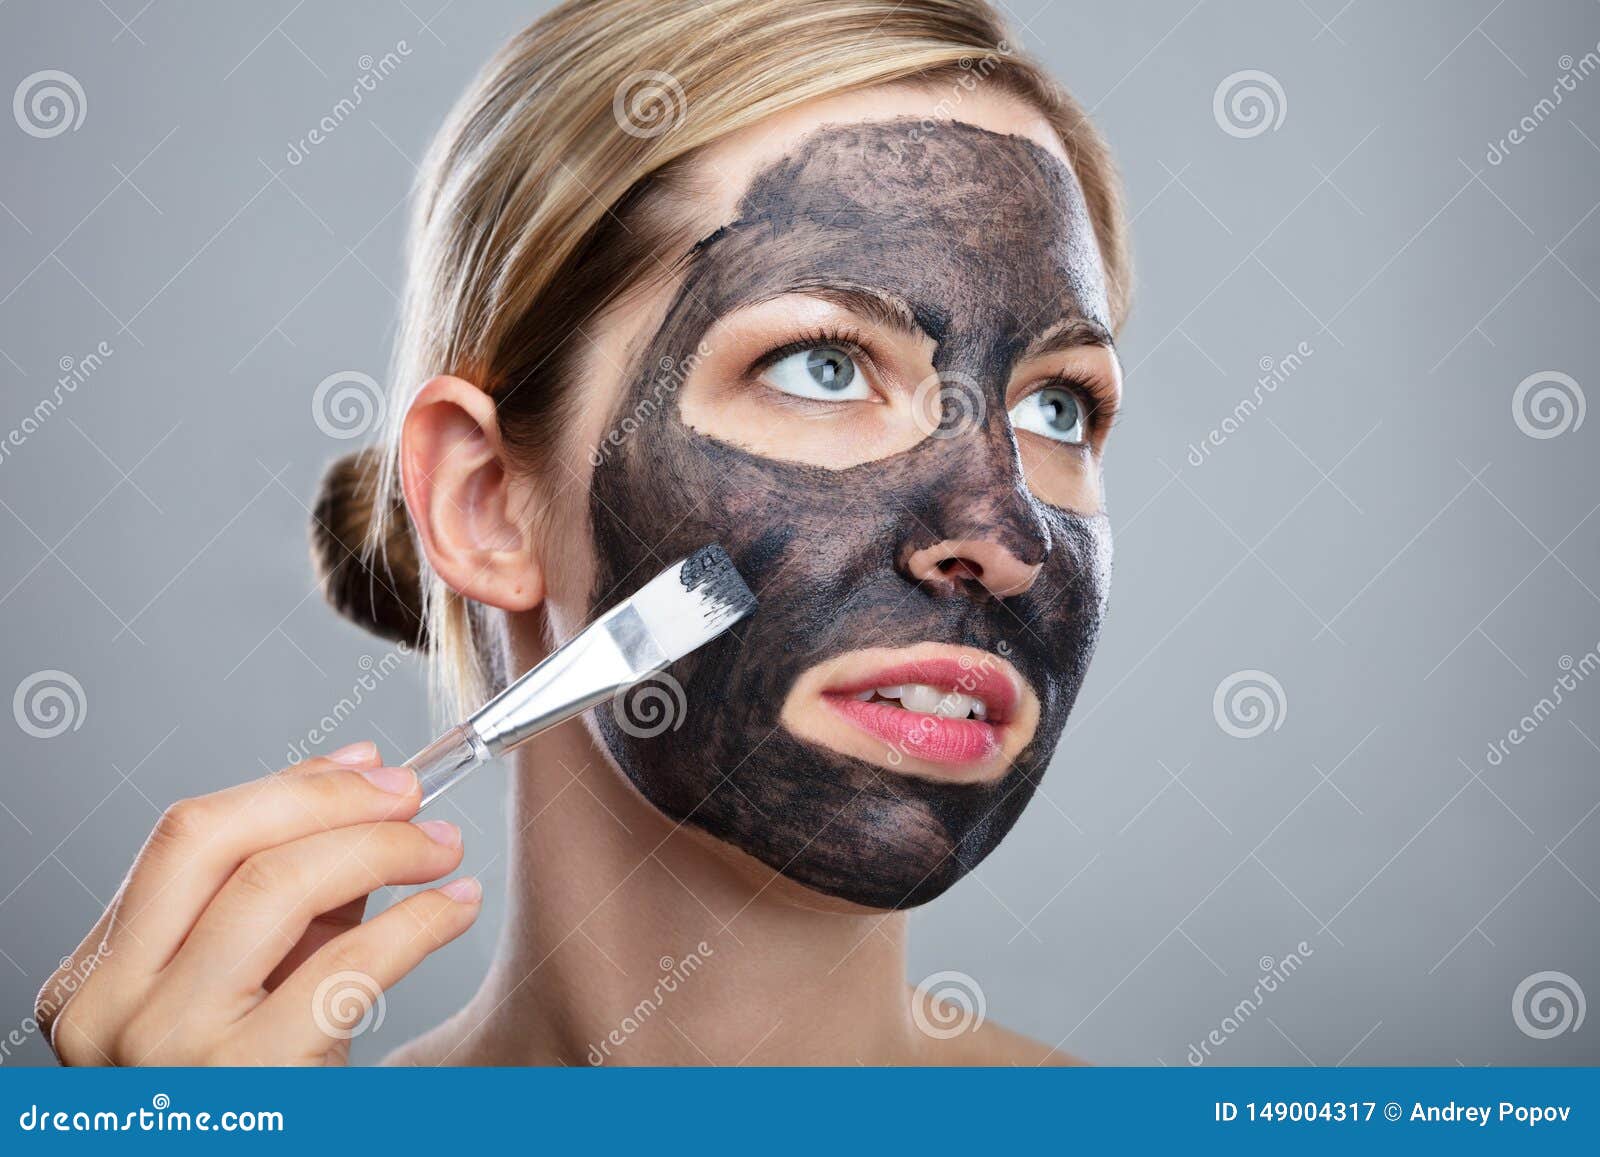 woman applying activated charcoal face mask with brush